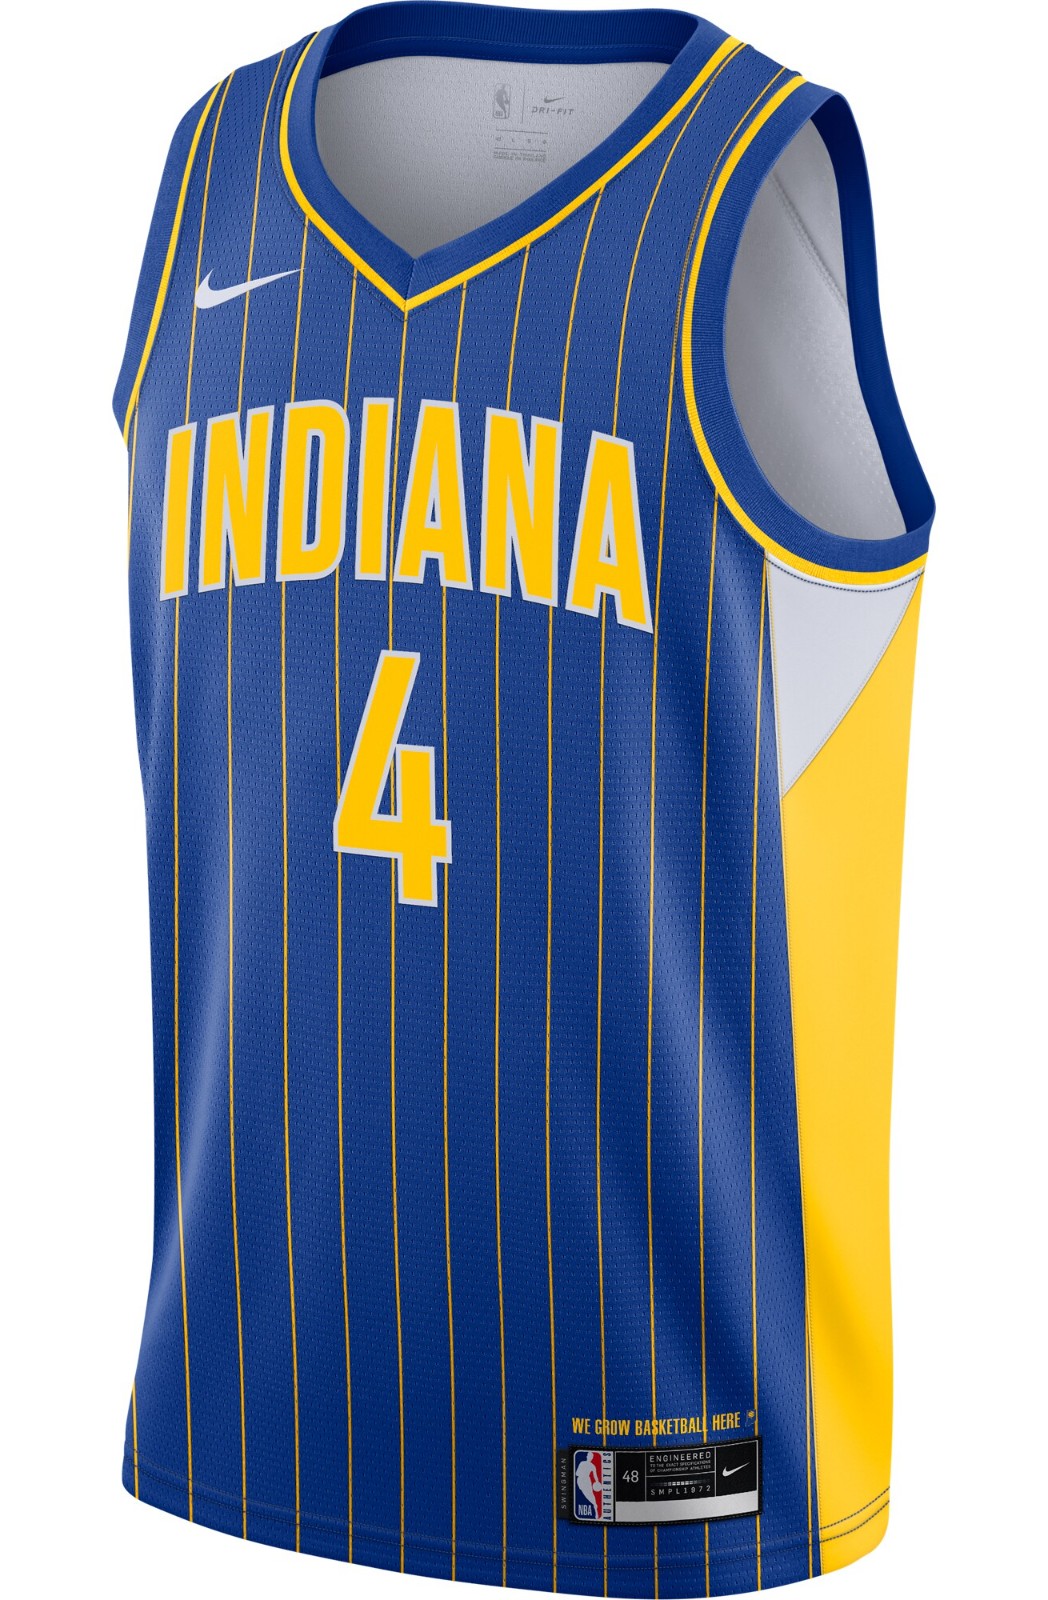 Indiana Pacers 2021-22 City Jersey by llu258 on DeviantArt